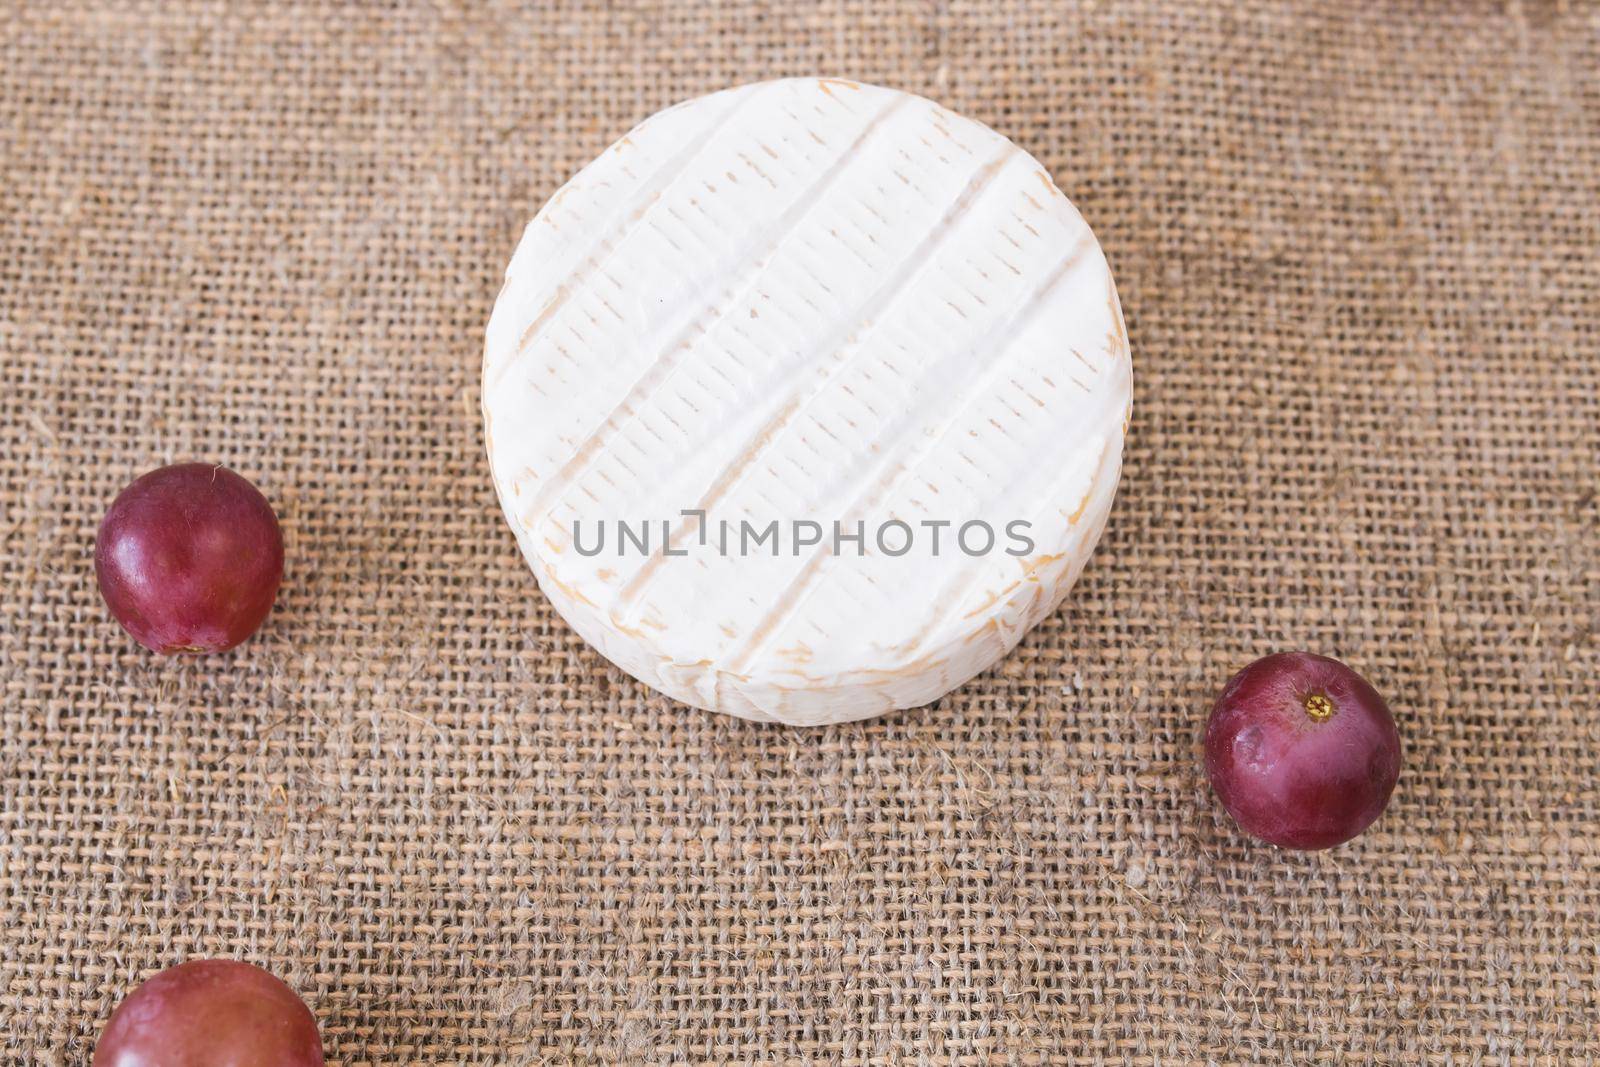 Brie or camembert cheese with grapes on rustic background top view by Satura86